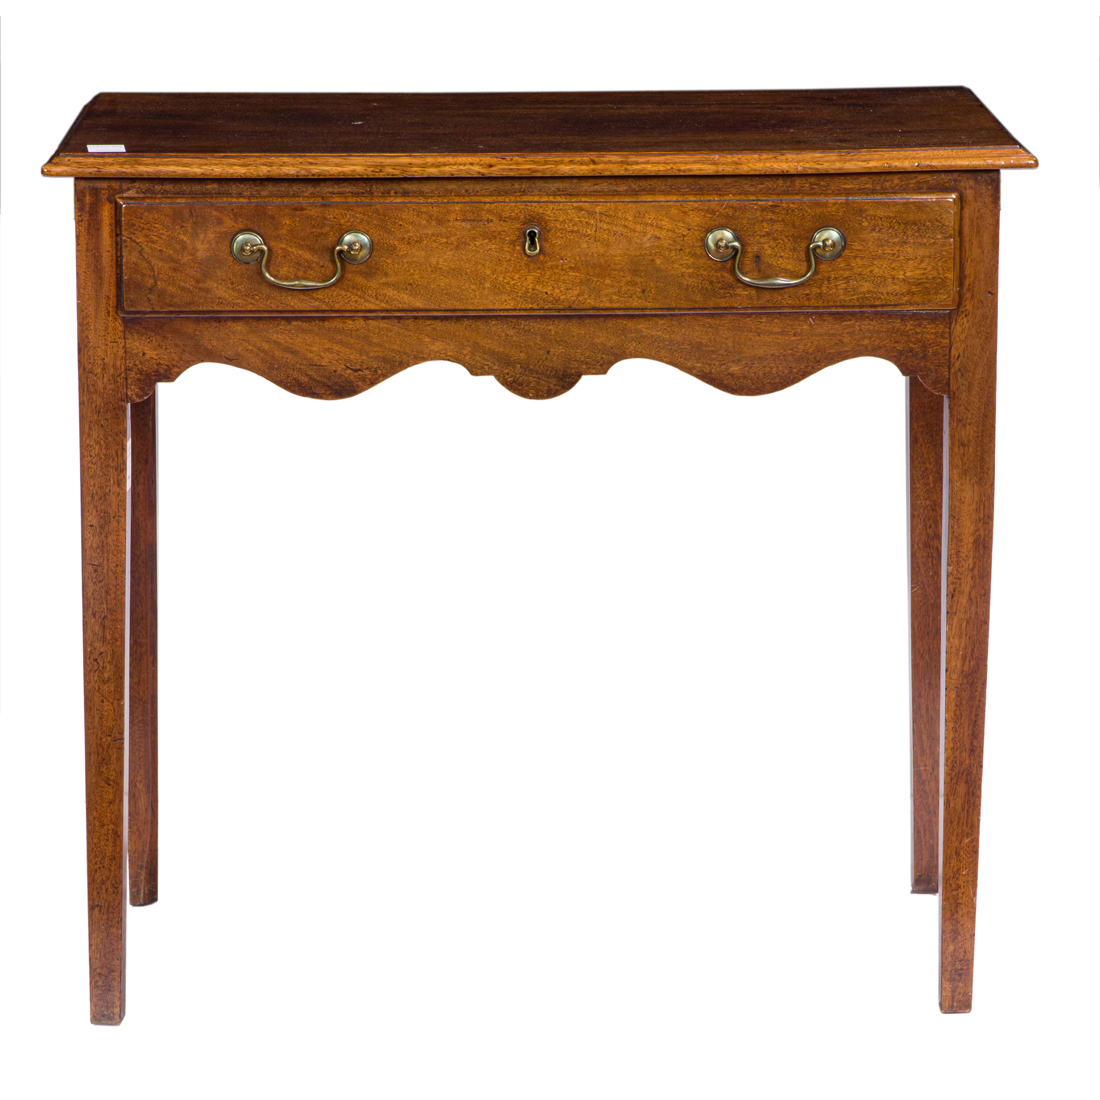 A CHIPPENDALE MAHOGANY SINGLE DRAWER